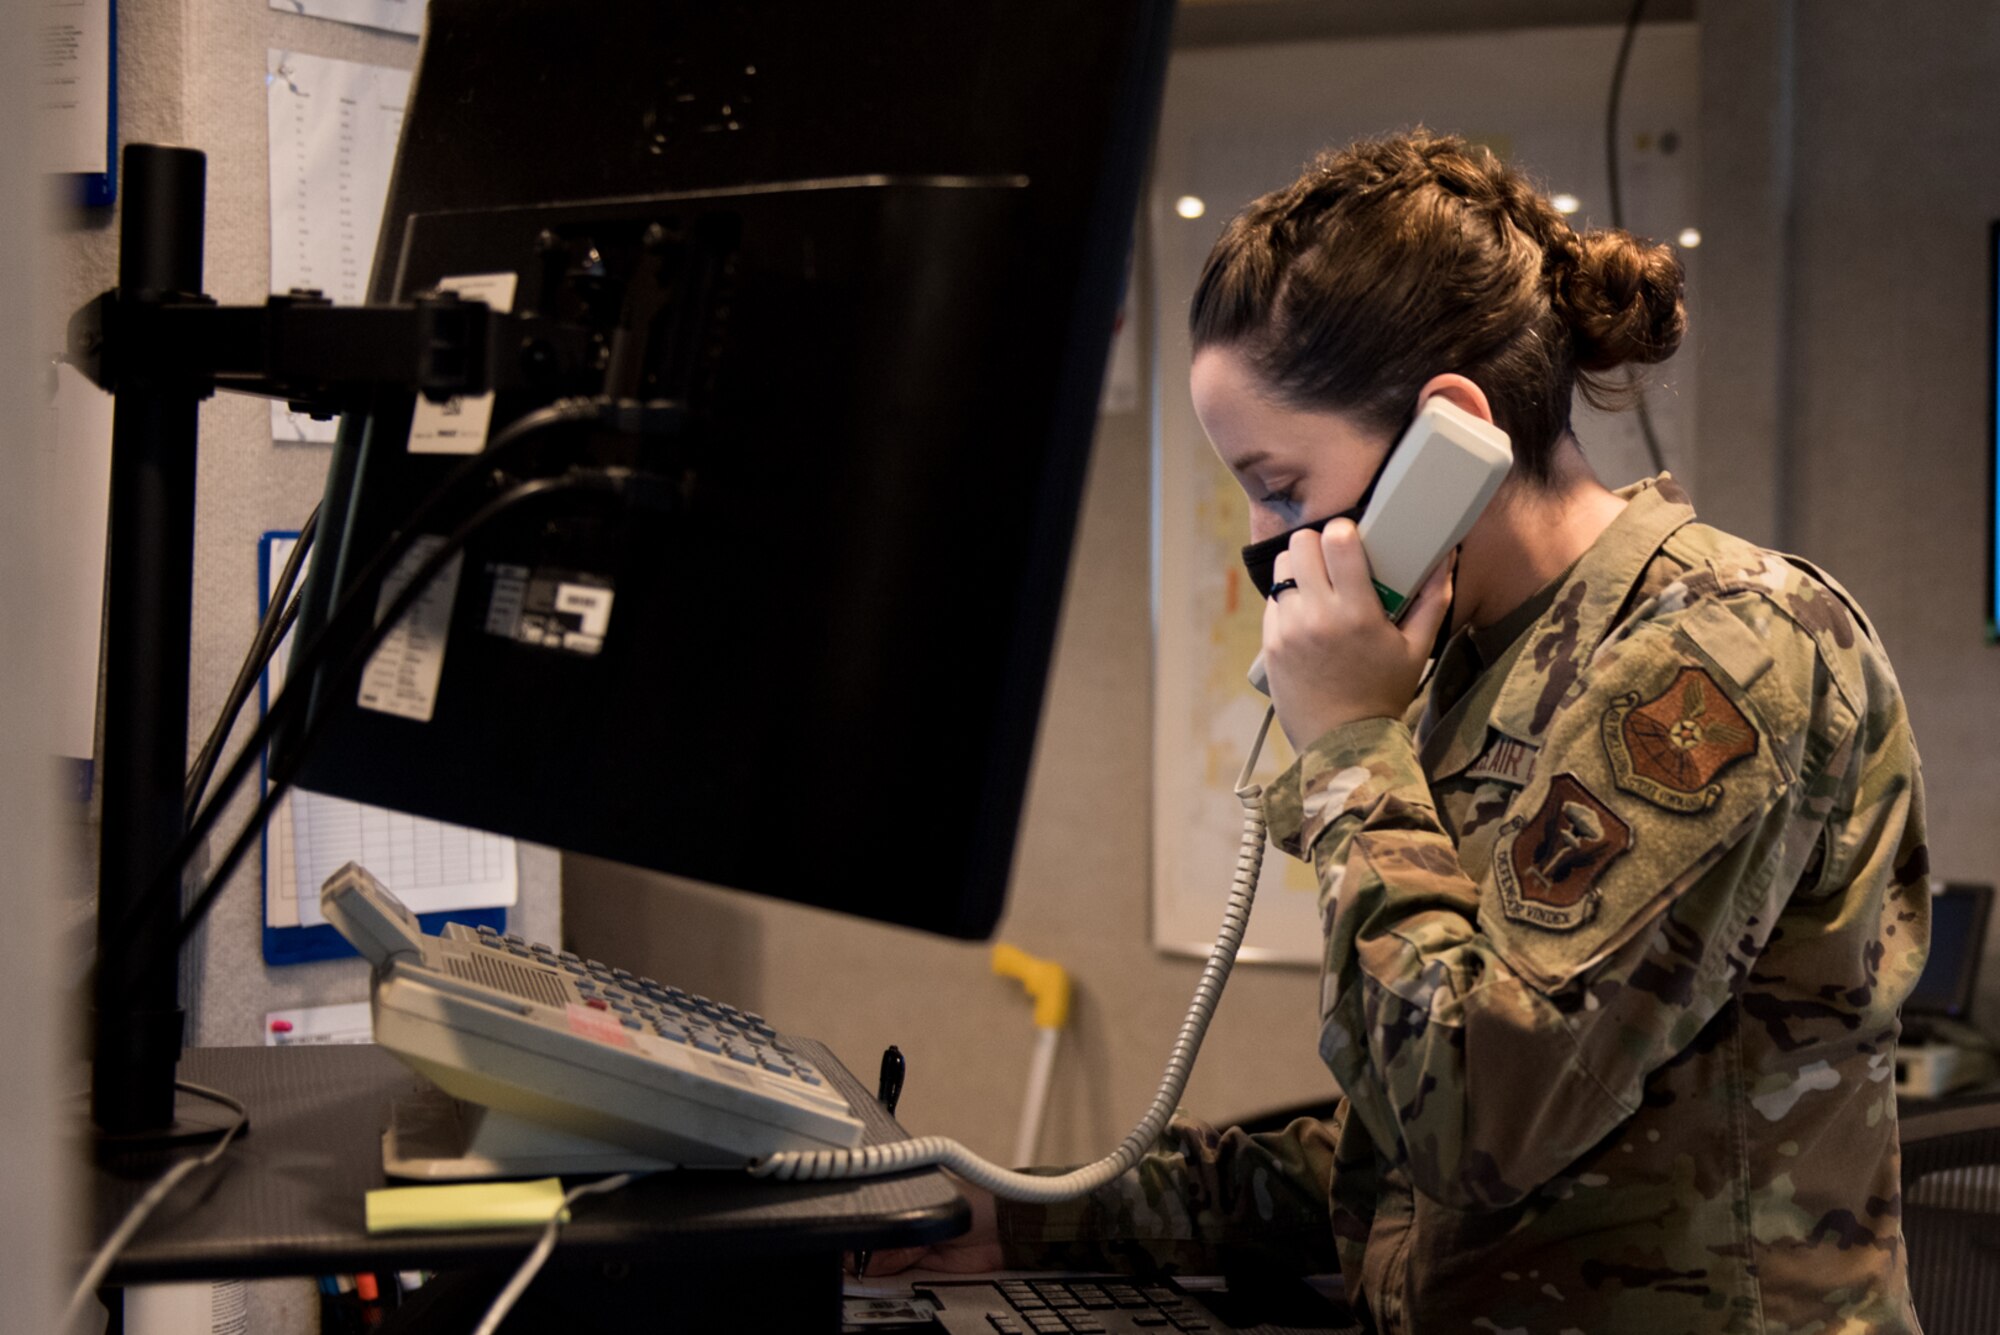 U.S. Air Force Airman 1st Class Enya Johnson, 509th Operation Support Squadron Airfield Management operations coordinator, answers the phone while working at the base operations desk at Whiteman Air Force Base, Missouri, Sept. 23, 2020. Johnson performs daily tasks like answering the alert phone, sending out weather warnings, inputting flight plans and performing airfield inspections. (U.S. Air Force photo by Airman 1st Class Christina Carter)